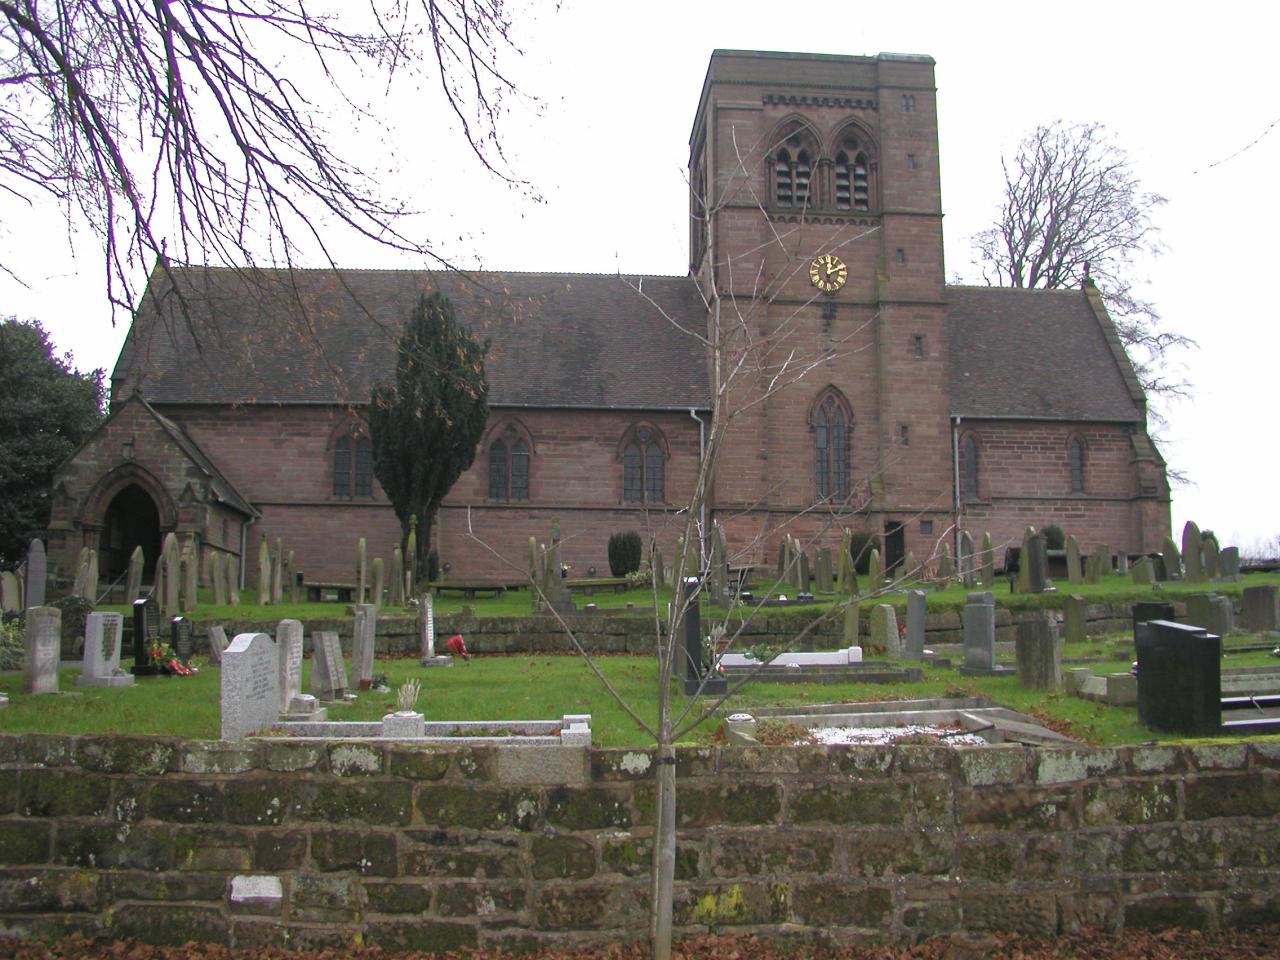 JPEG image - Norley Church: view from the road ...